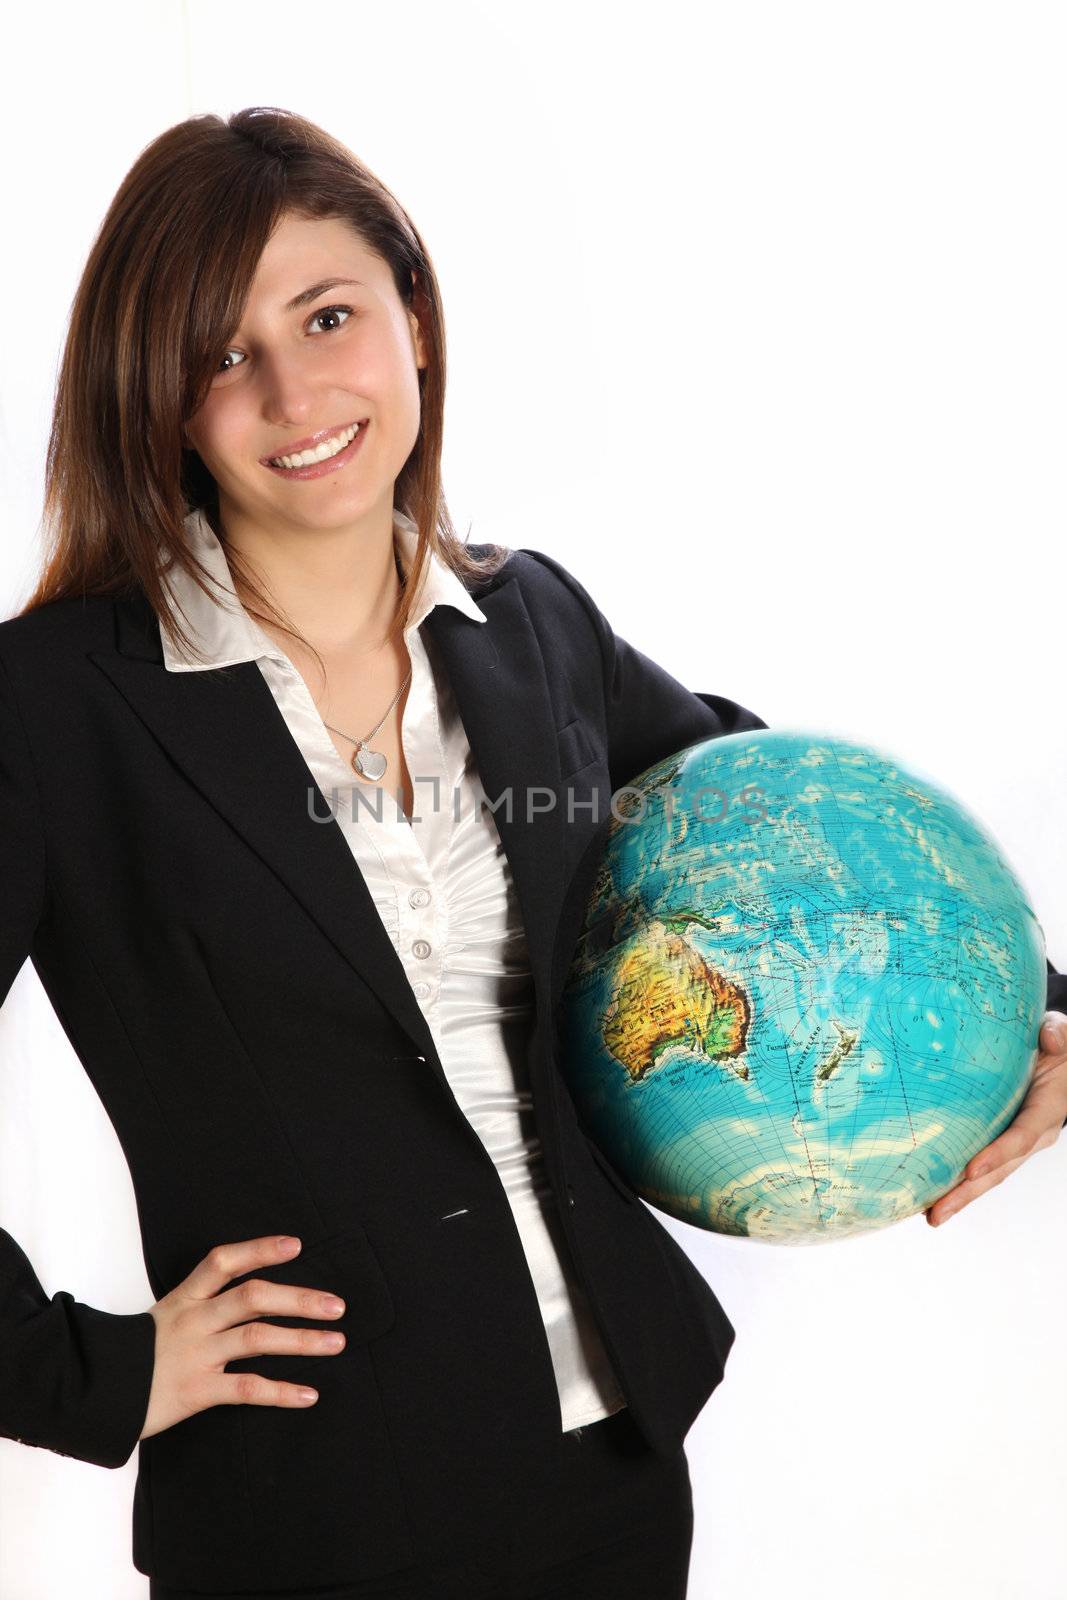 Young woman carrying a globe under his arm. She wears a black suit and smiling.